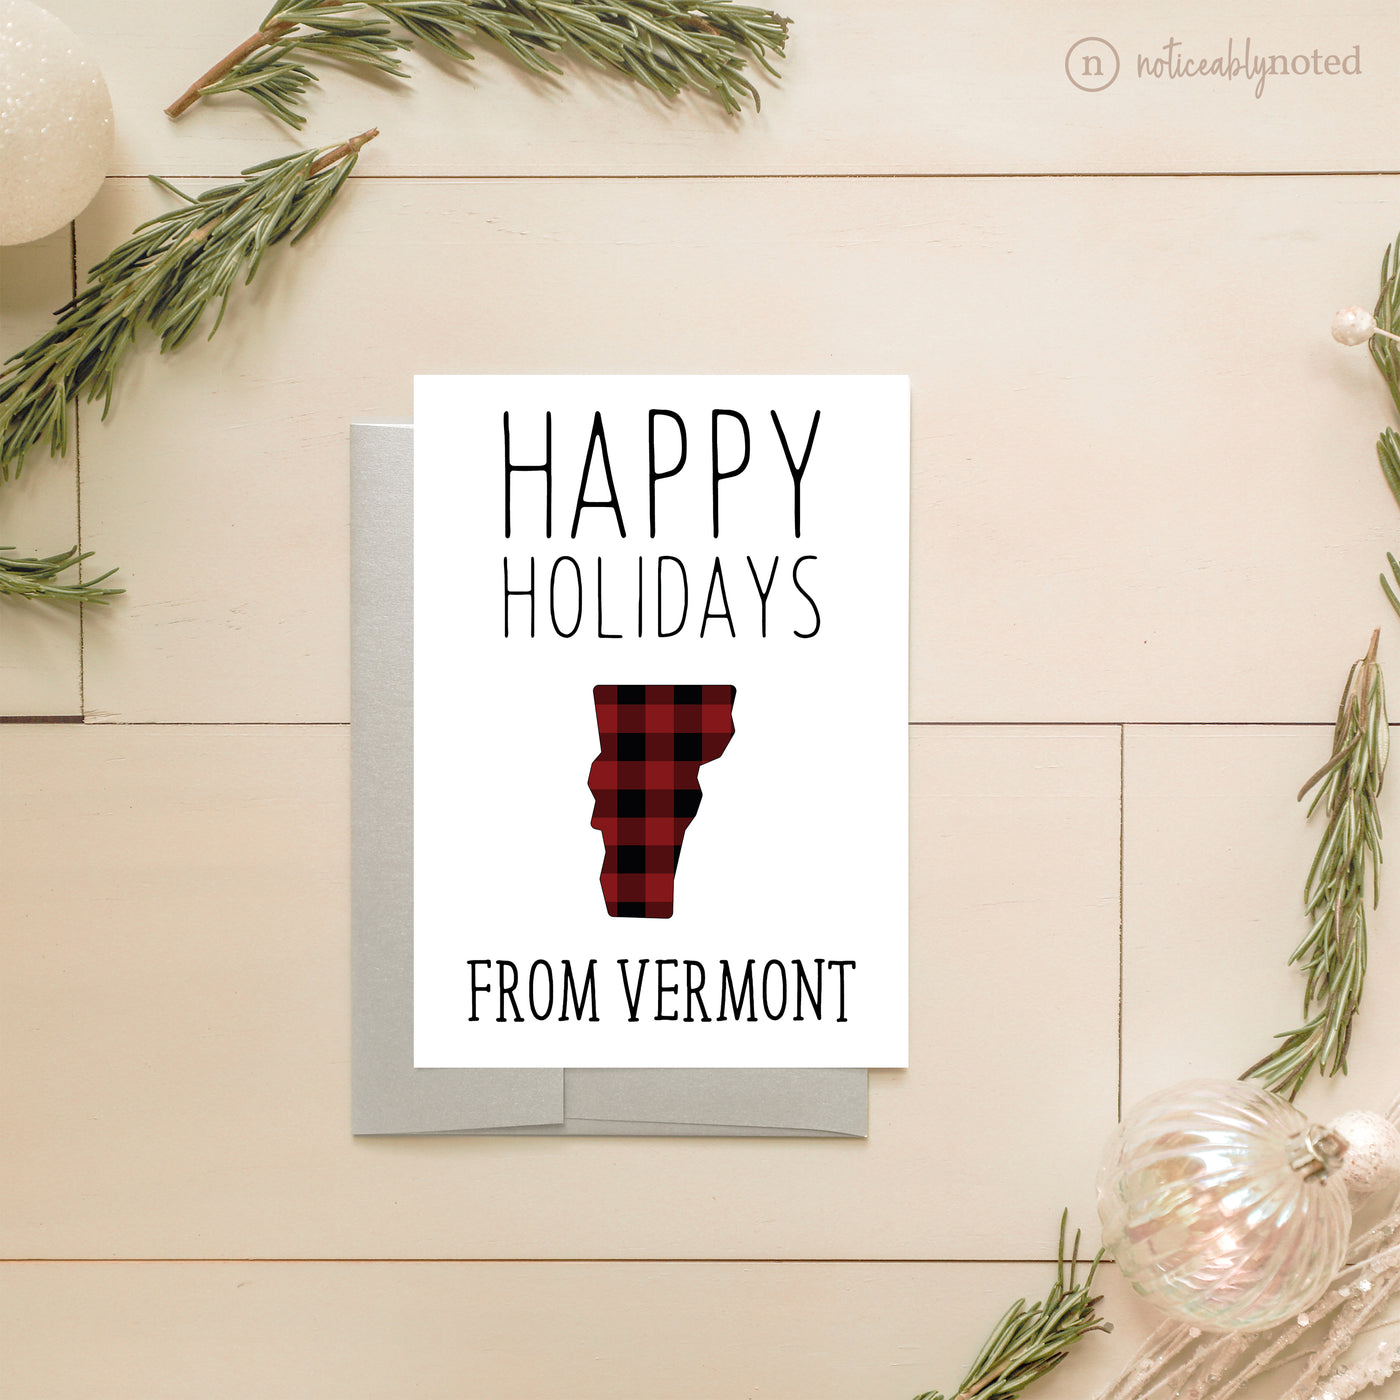 Vermont Holiday Card - Happy Holidays | Noticeably Noted